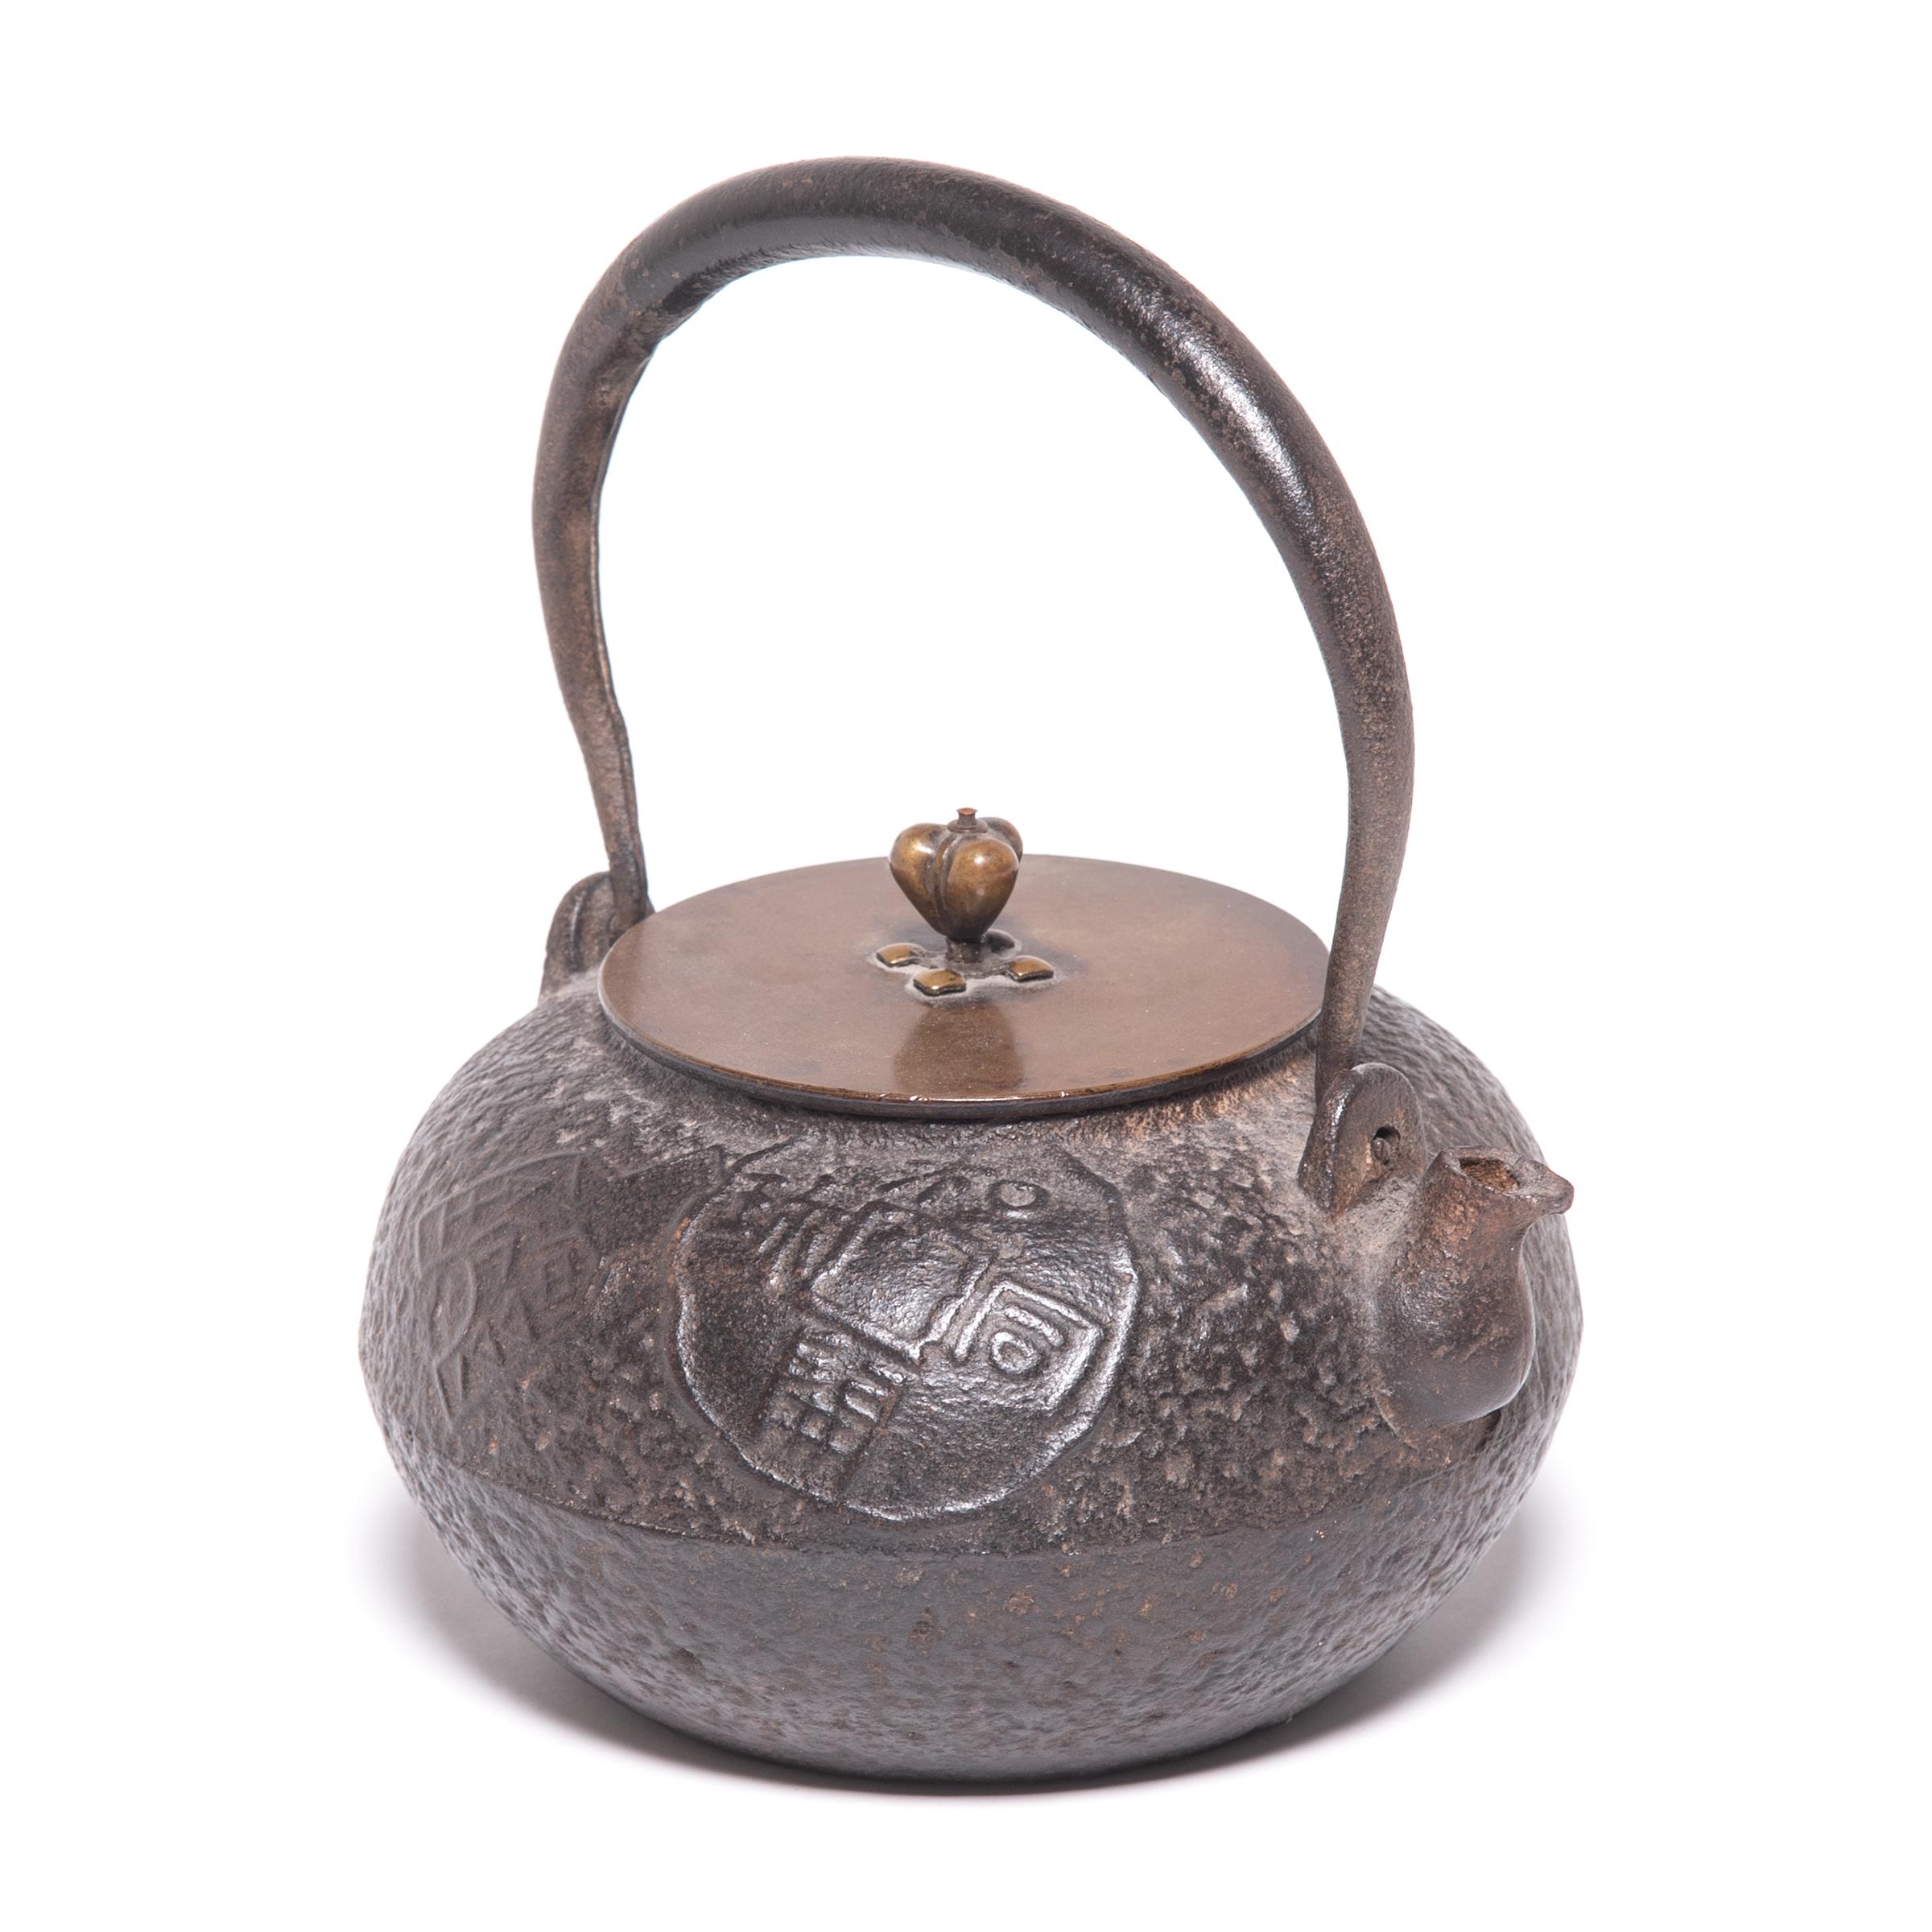 With a short spout and an elegant, arched handle, this Japanese teapot was used to boil water for traditional tea ceremonies. Known as tetsubin, the kettle’s cast-iron construction is said to change the quality of the water, making tea taste mellow